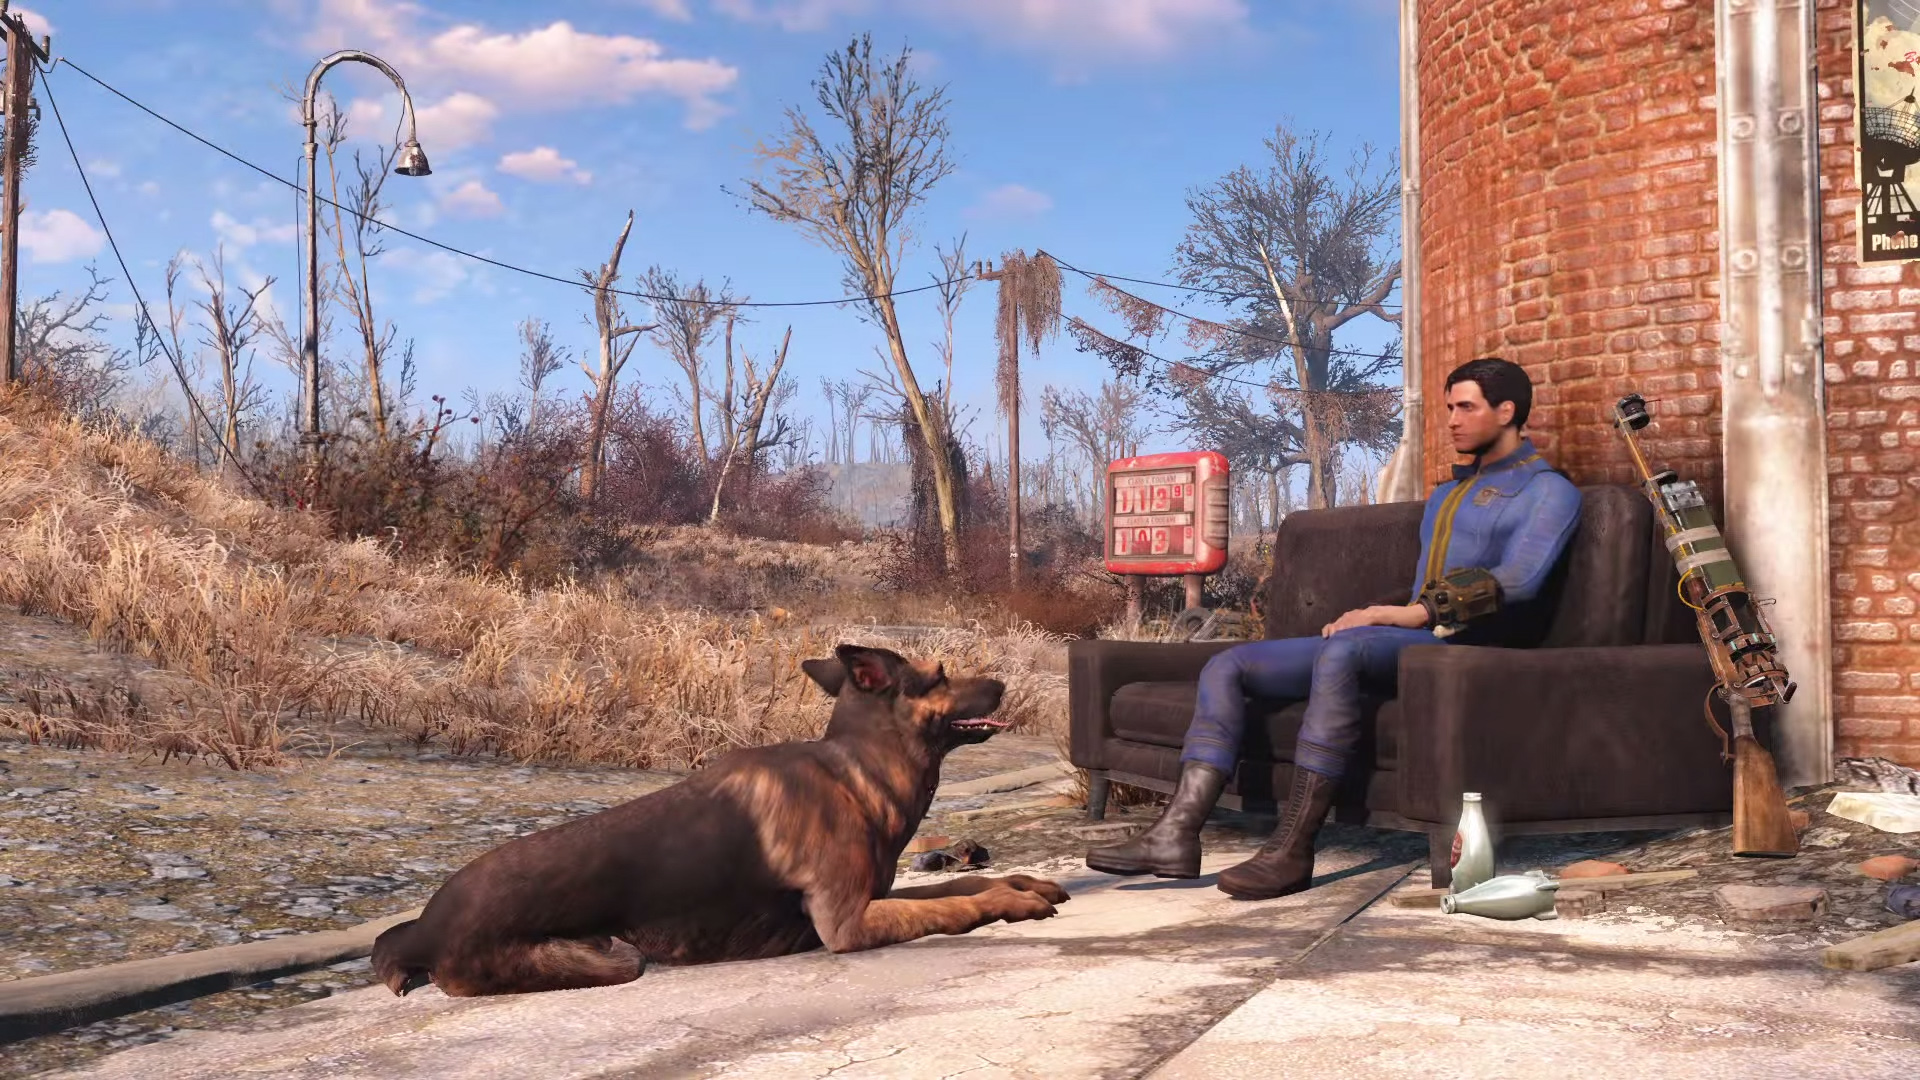 Get To Know Dogmeat From Fallout 4 A Little Better - AggroGamer - Game News